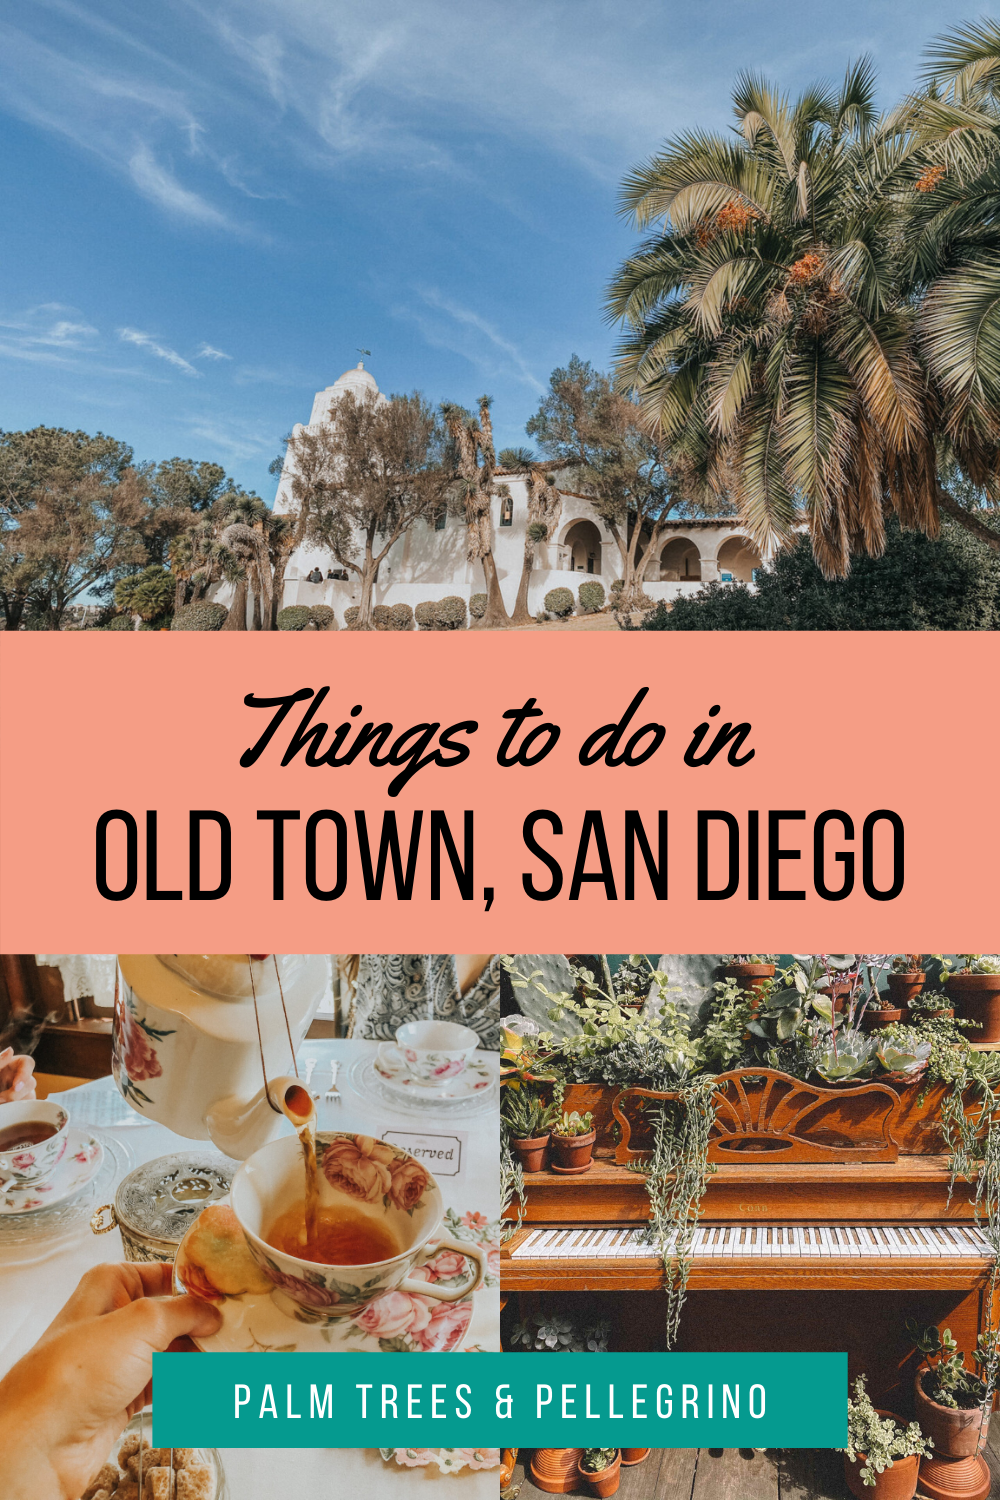 Things to do in Old Town San Diego - Palm Trees and Pellegrino